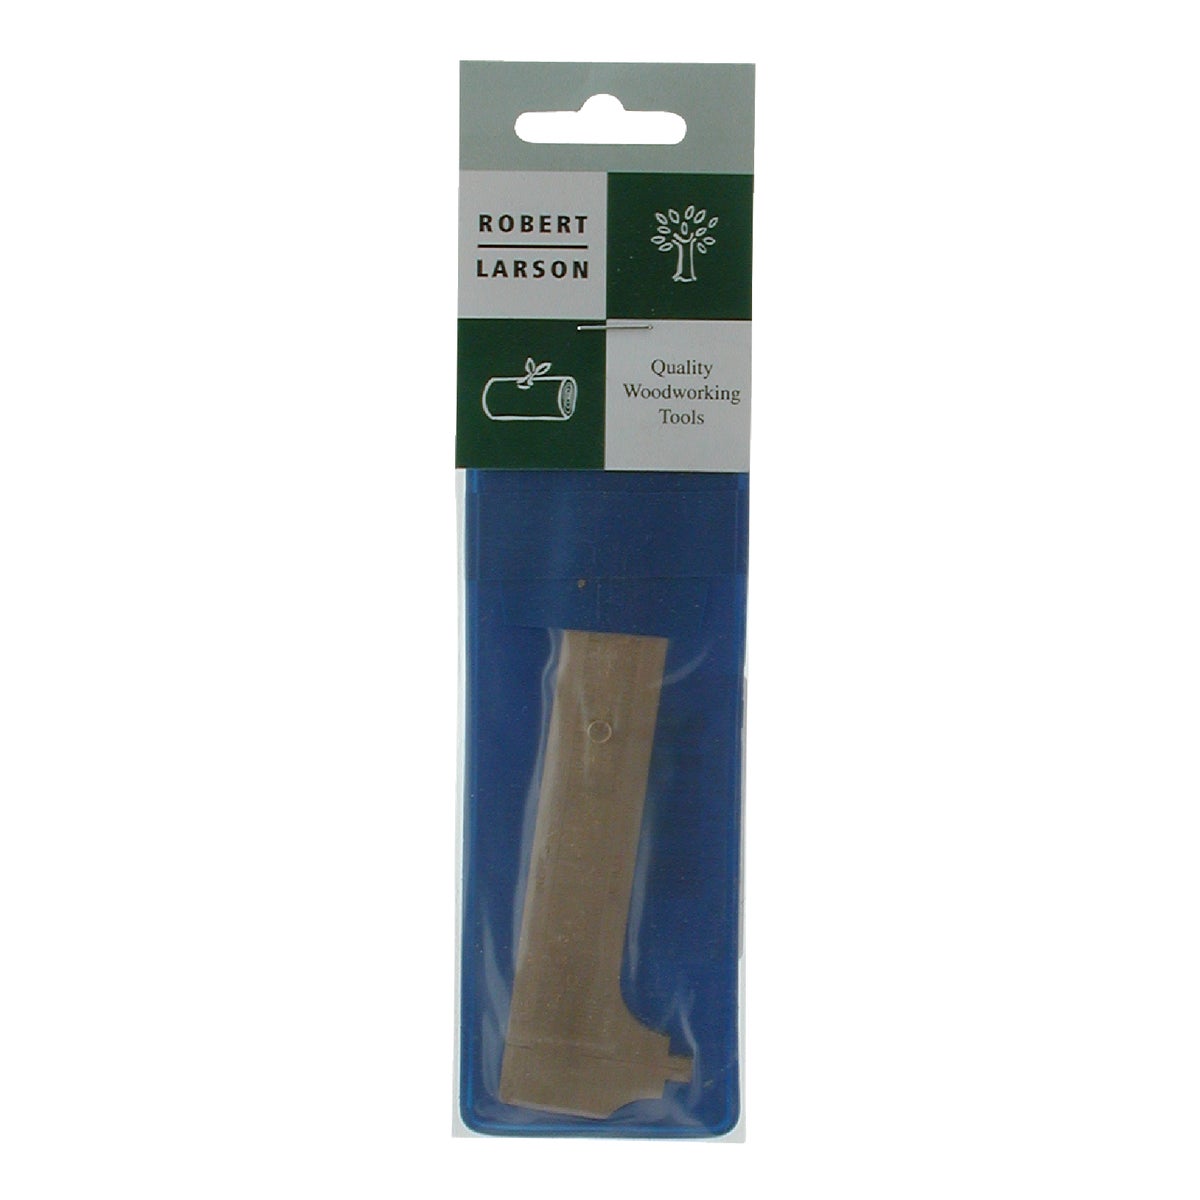 Item 315849, Solid brass caliper will quickly determine the thickness of material.